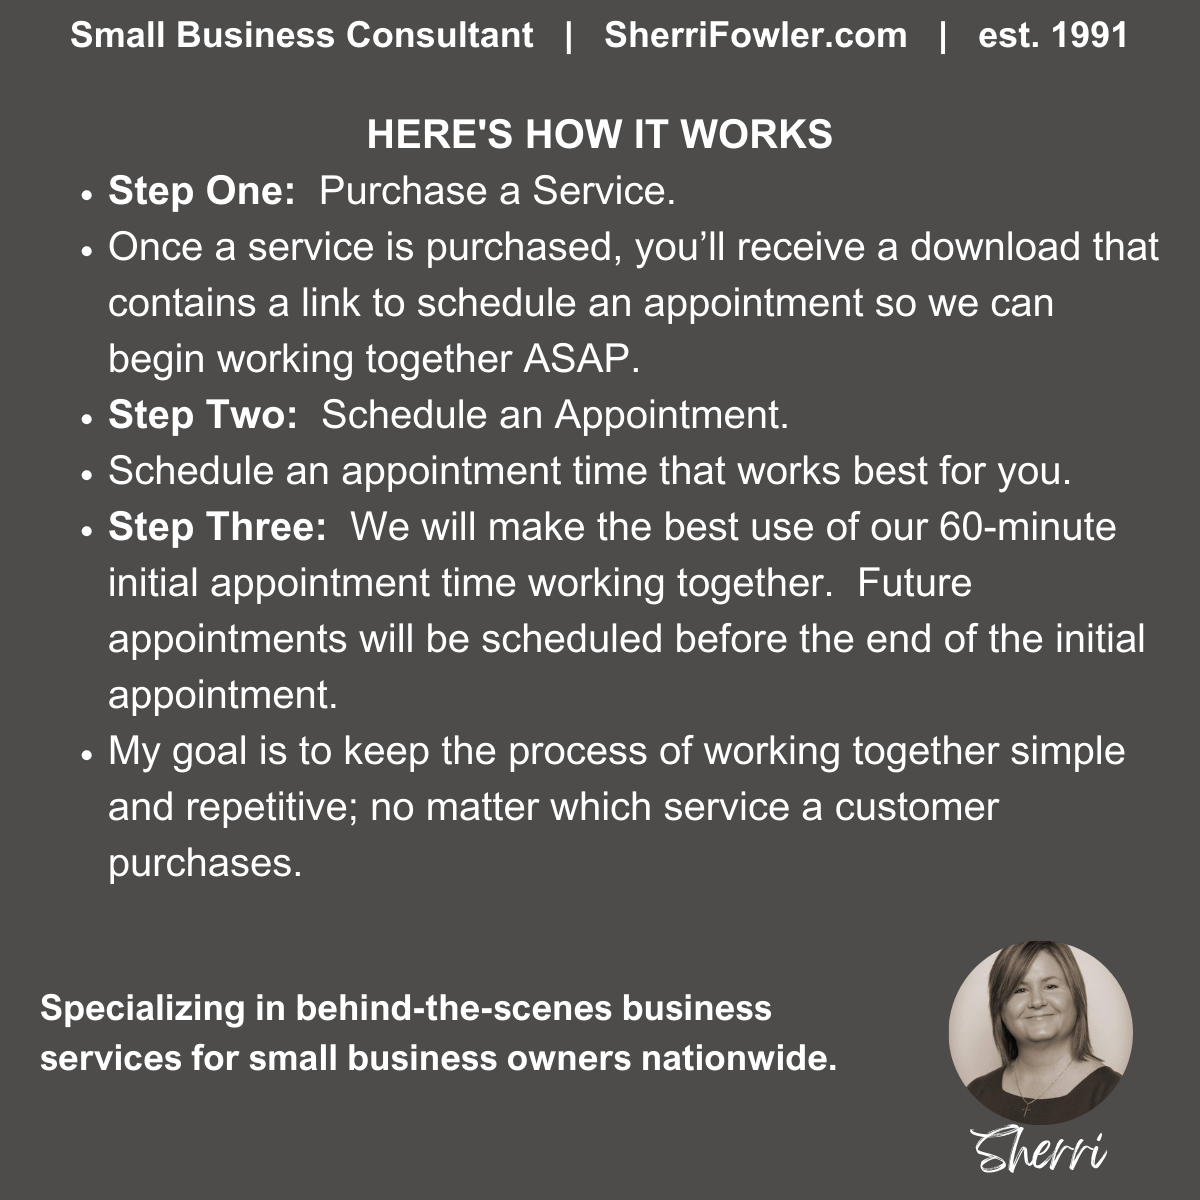 Flyer Design Service for small business owners and nonprofits includes creation and copywriting or content writing at SherriFowler.com